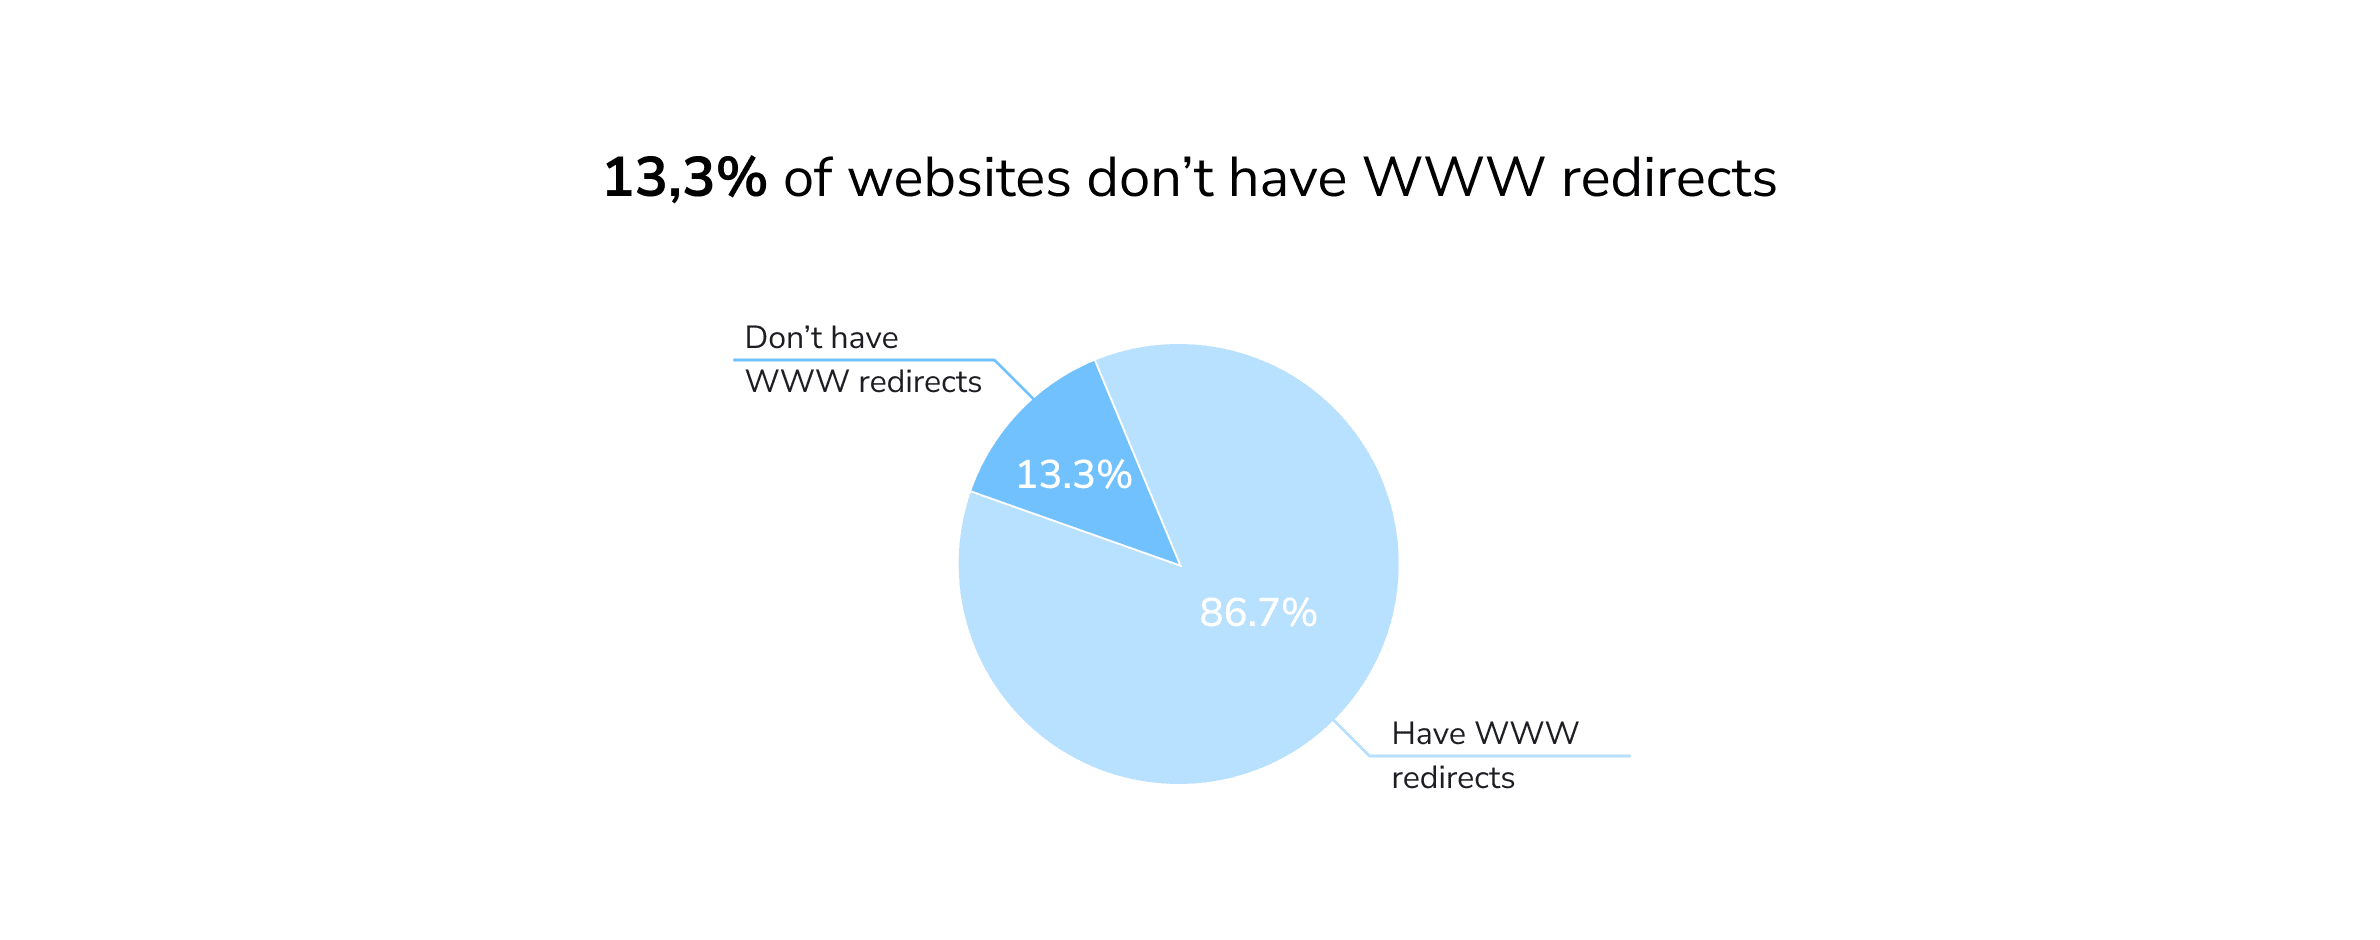 Missing WWW redirects